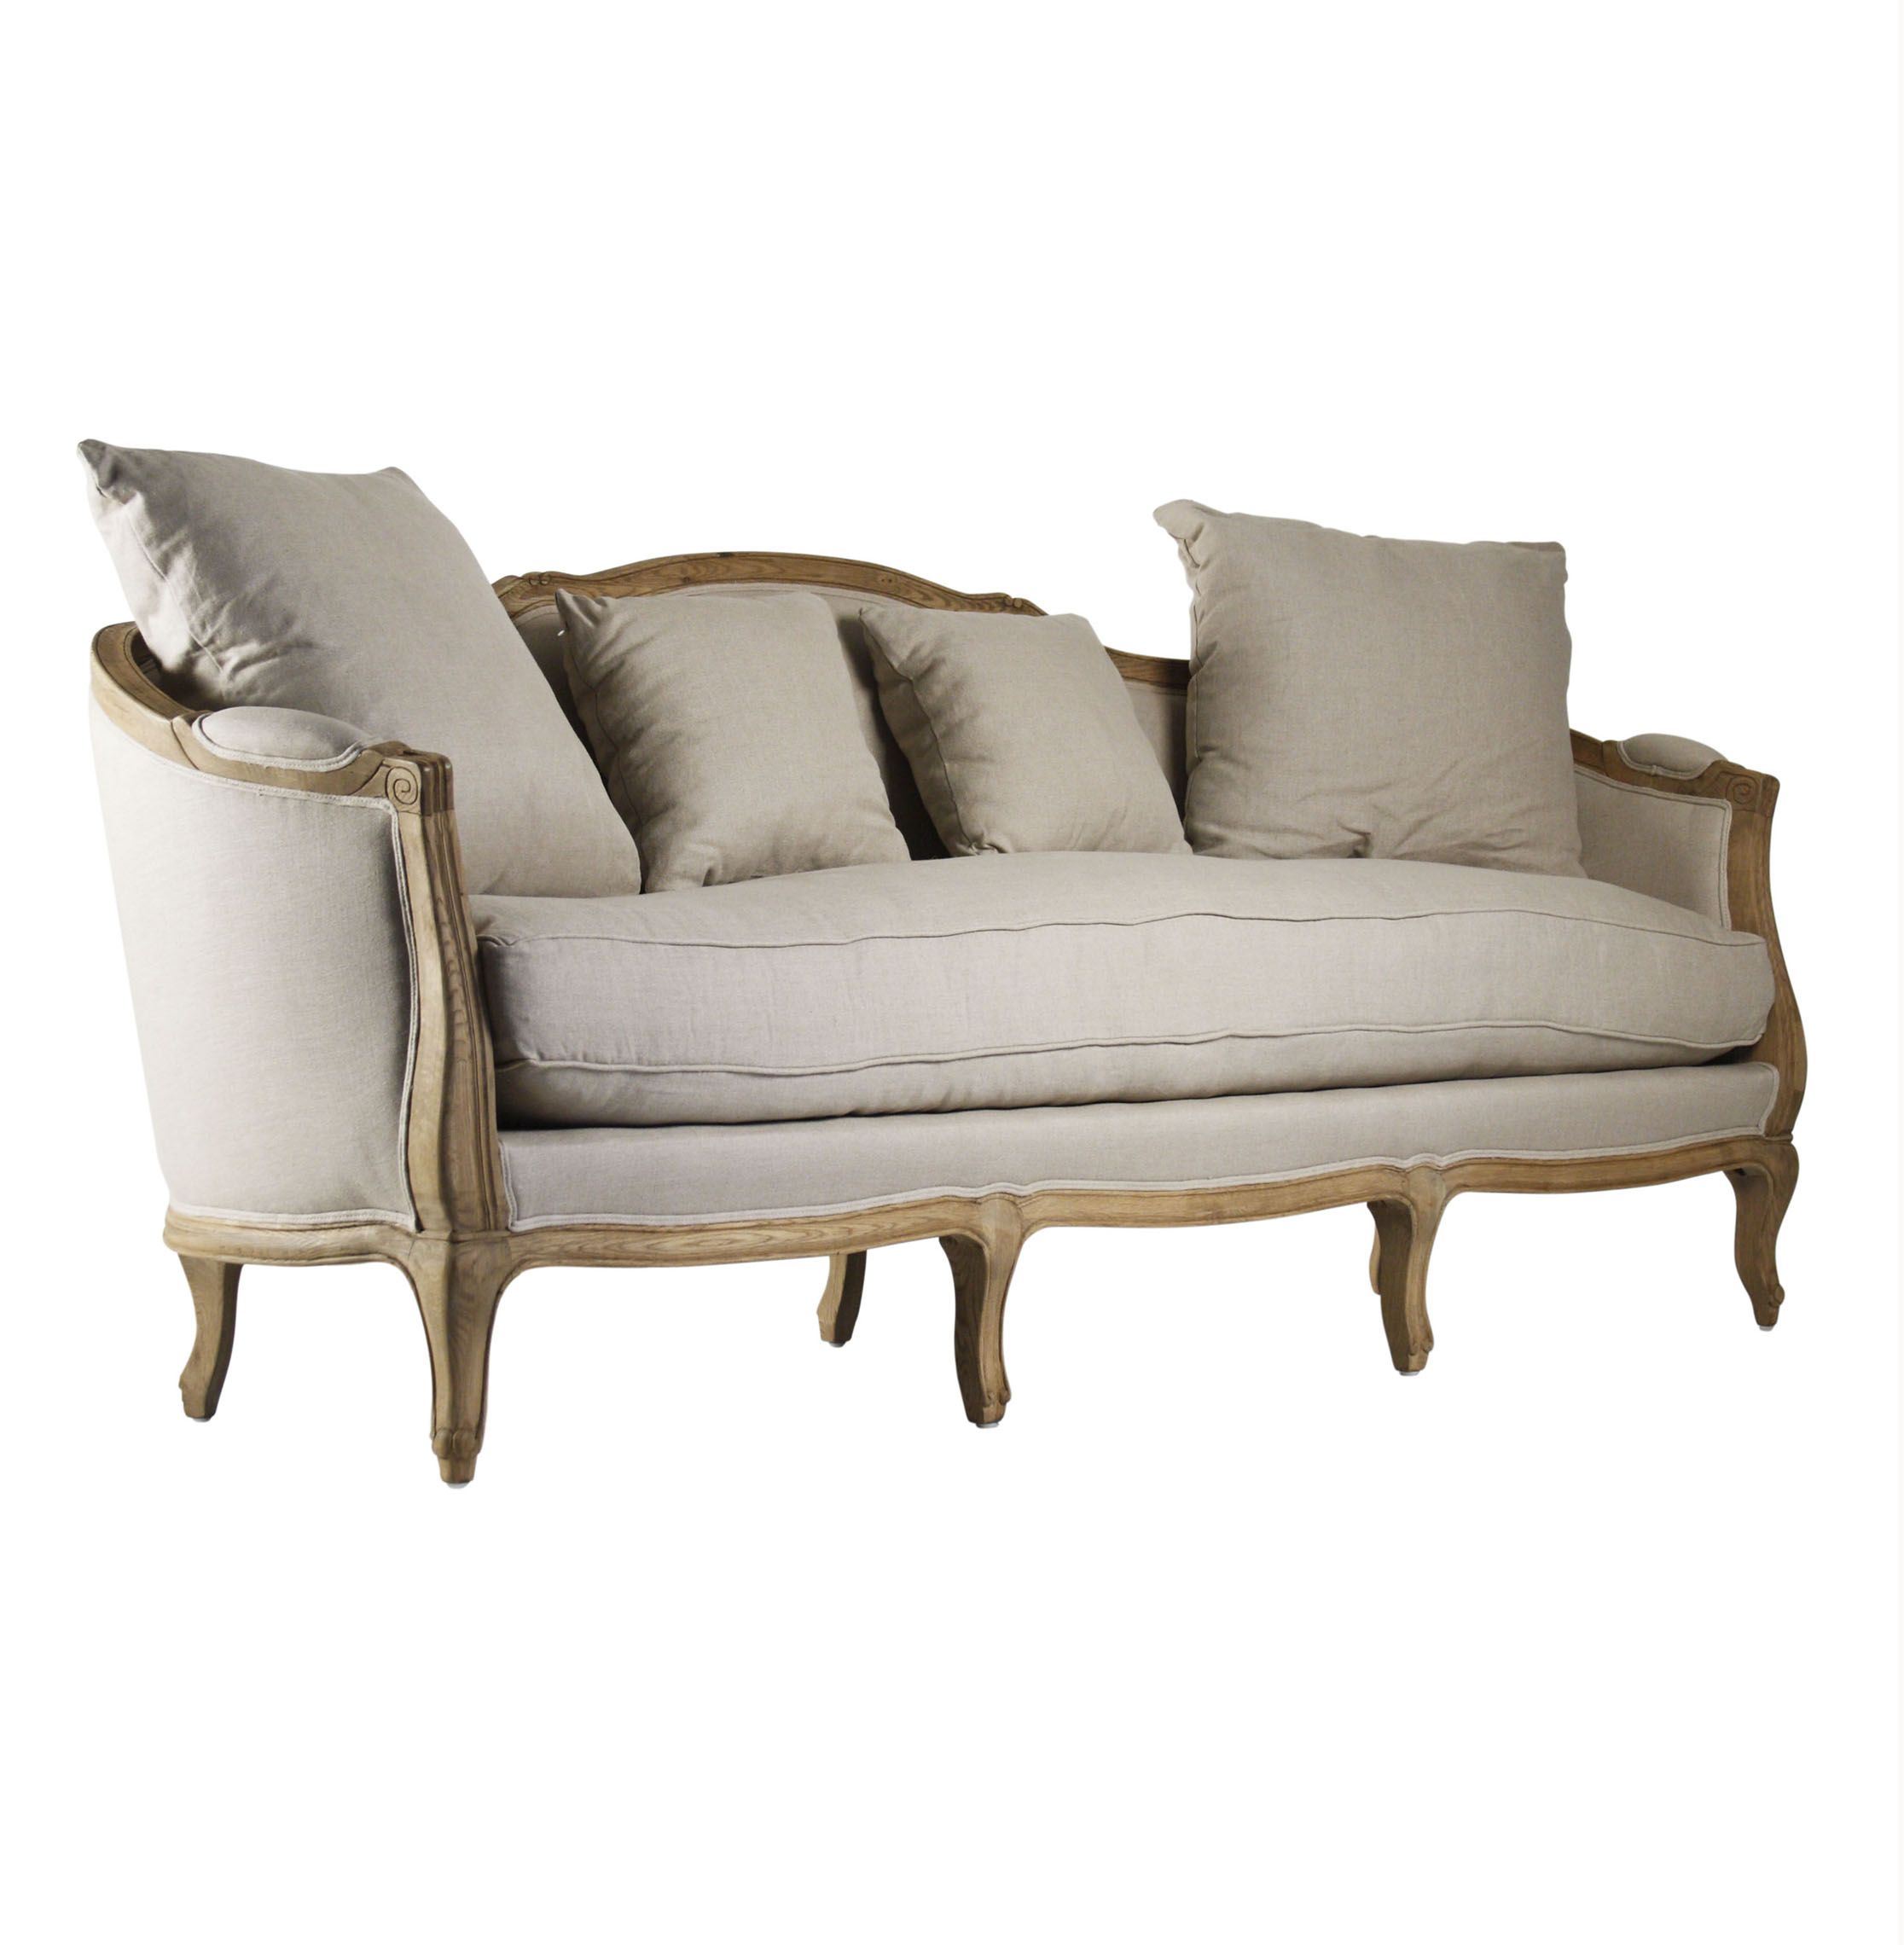 Rue du Bac French Country Linen Feather Down Sofa | Kathy Kuo Home